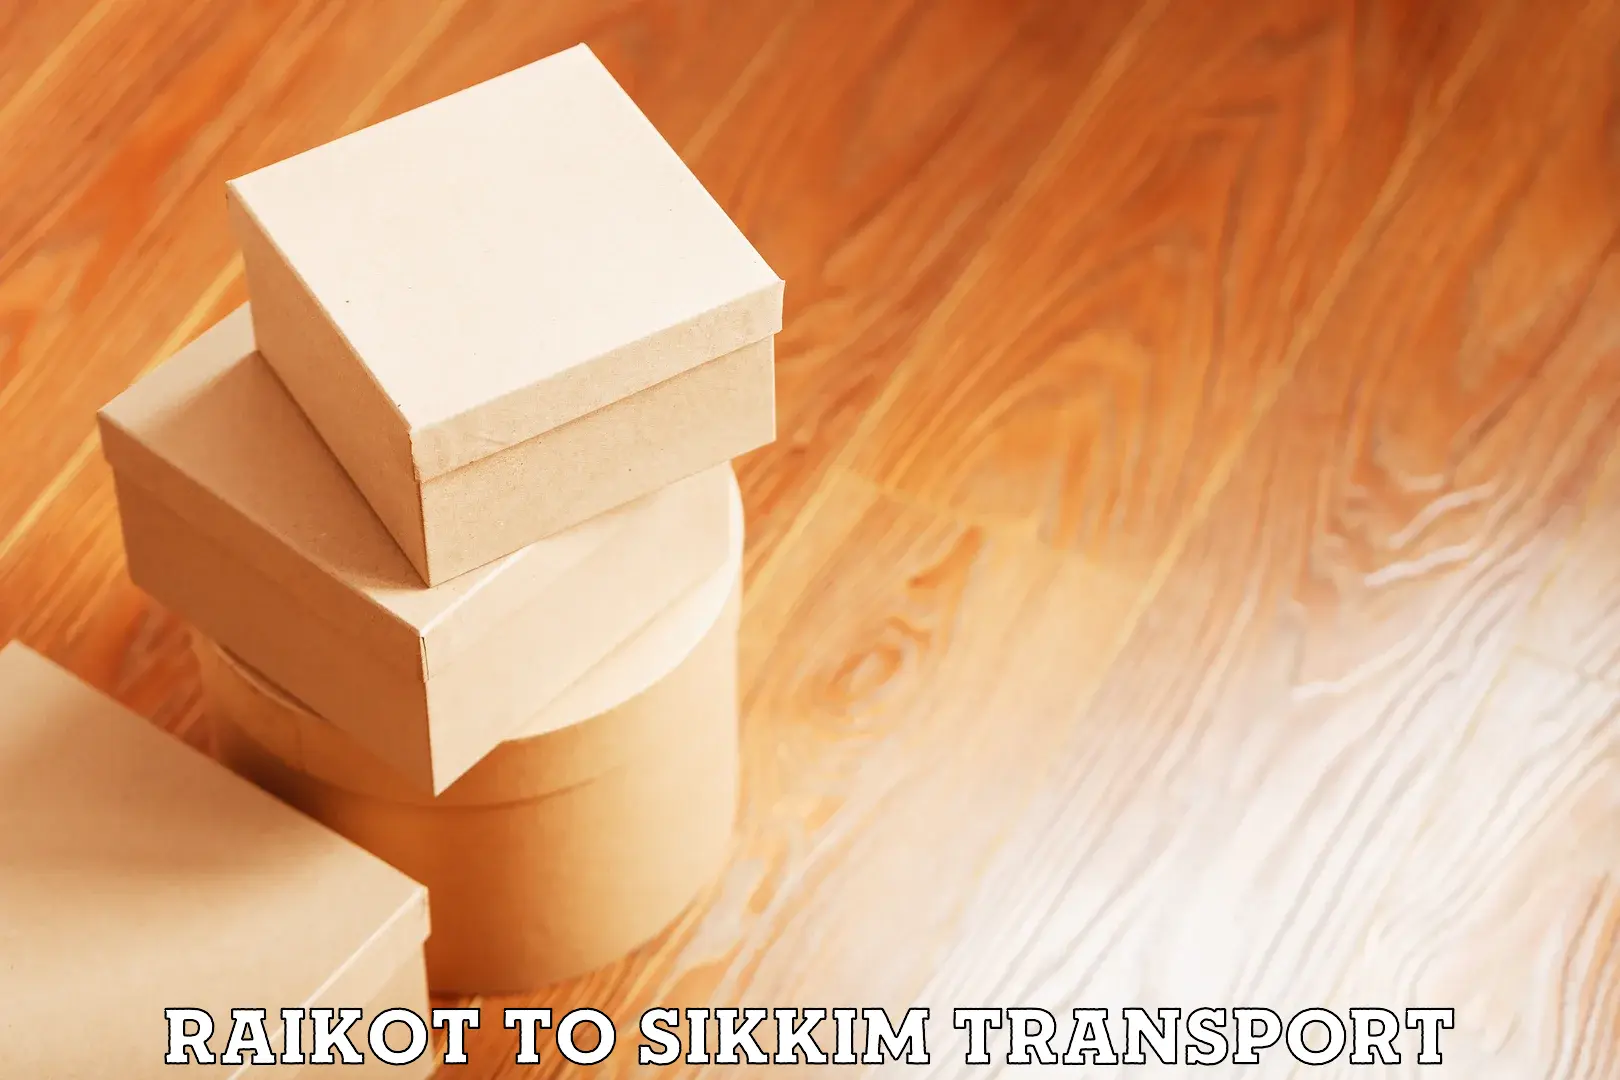 Daily transport service Raikot to East Sikkim